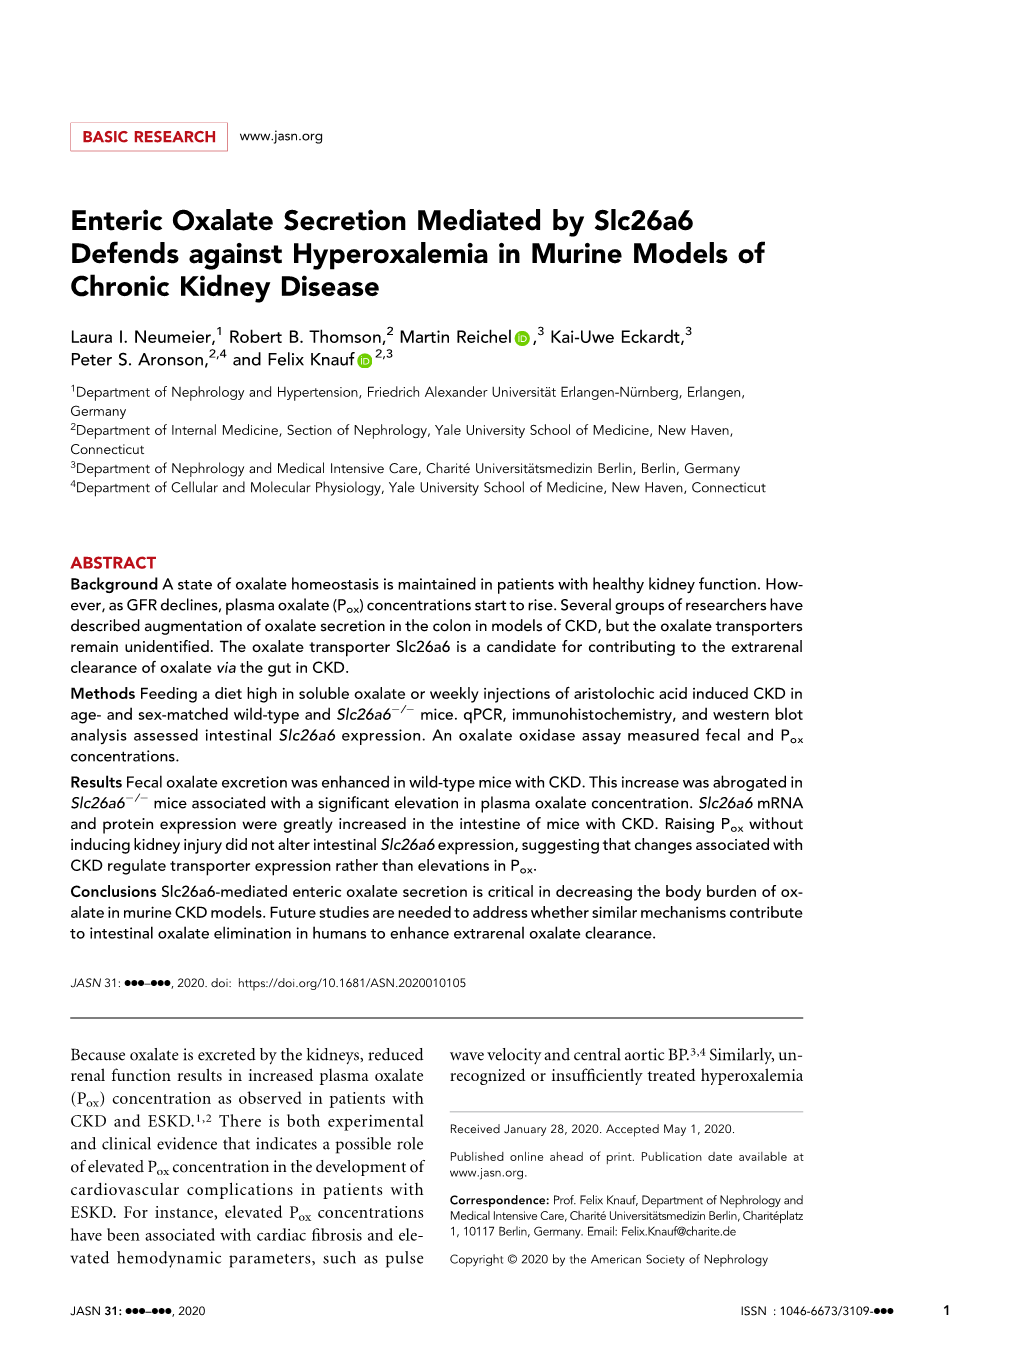 Enteric Oxalate Secretion Mediated by Slc26a6 Defends Against Hyperoxalemia in Murine Models of Chronic Kidney Disease